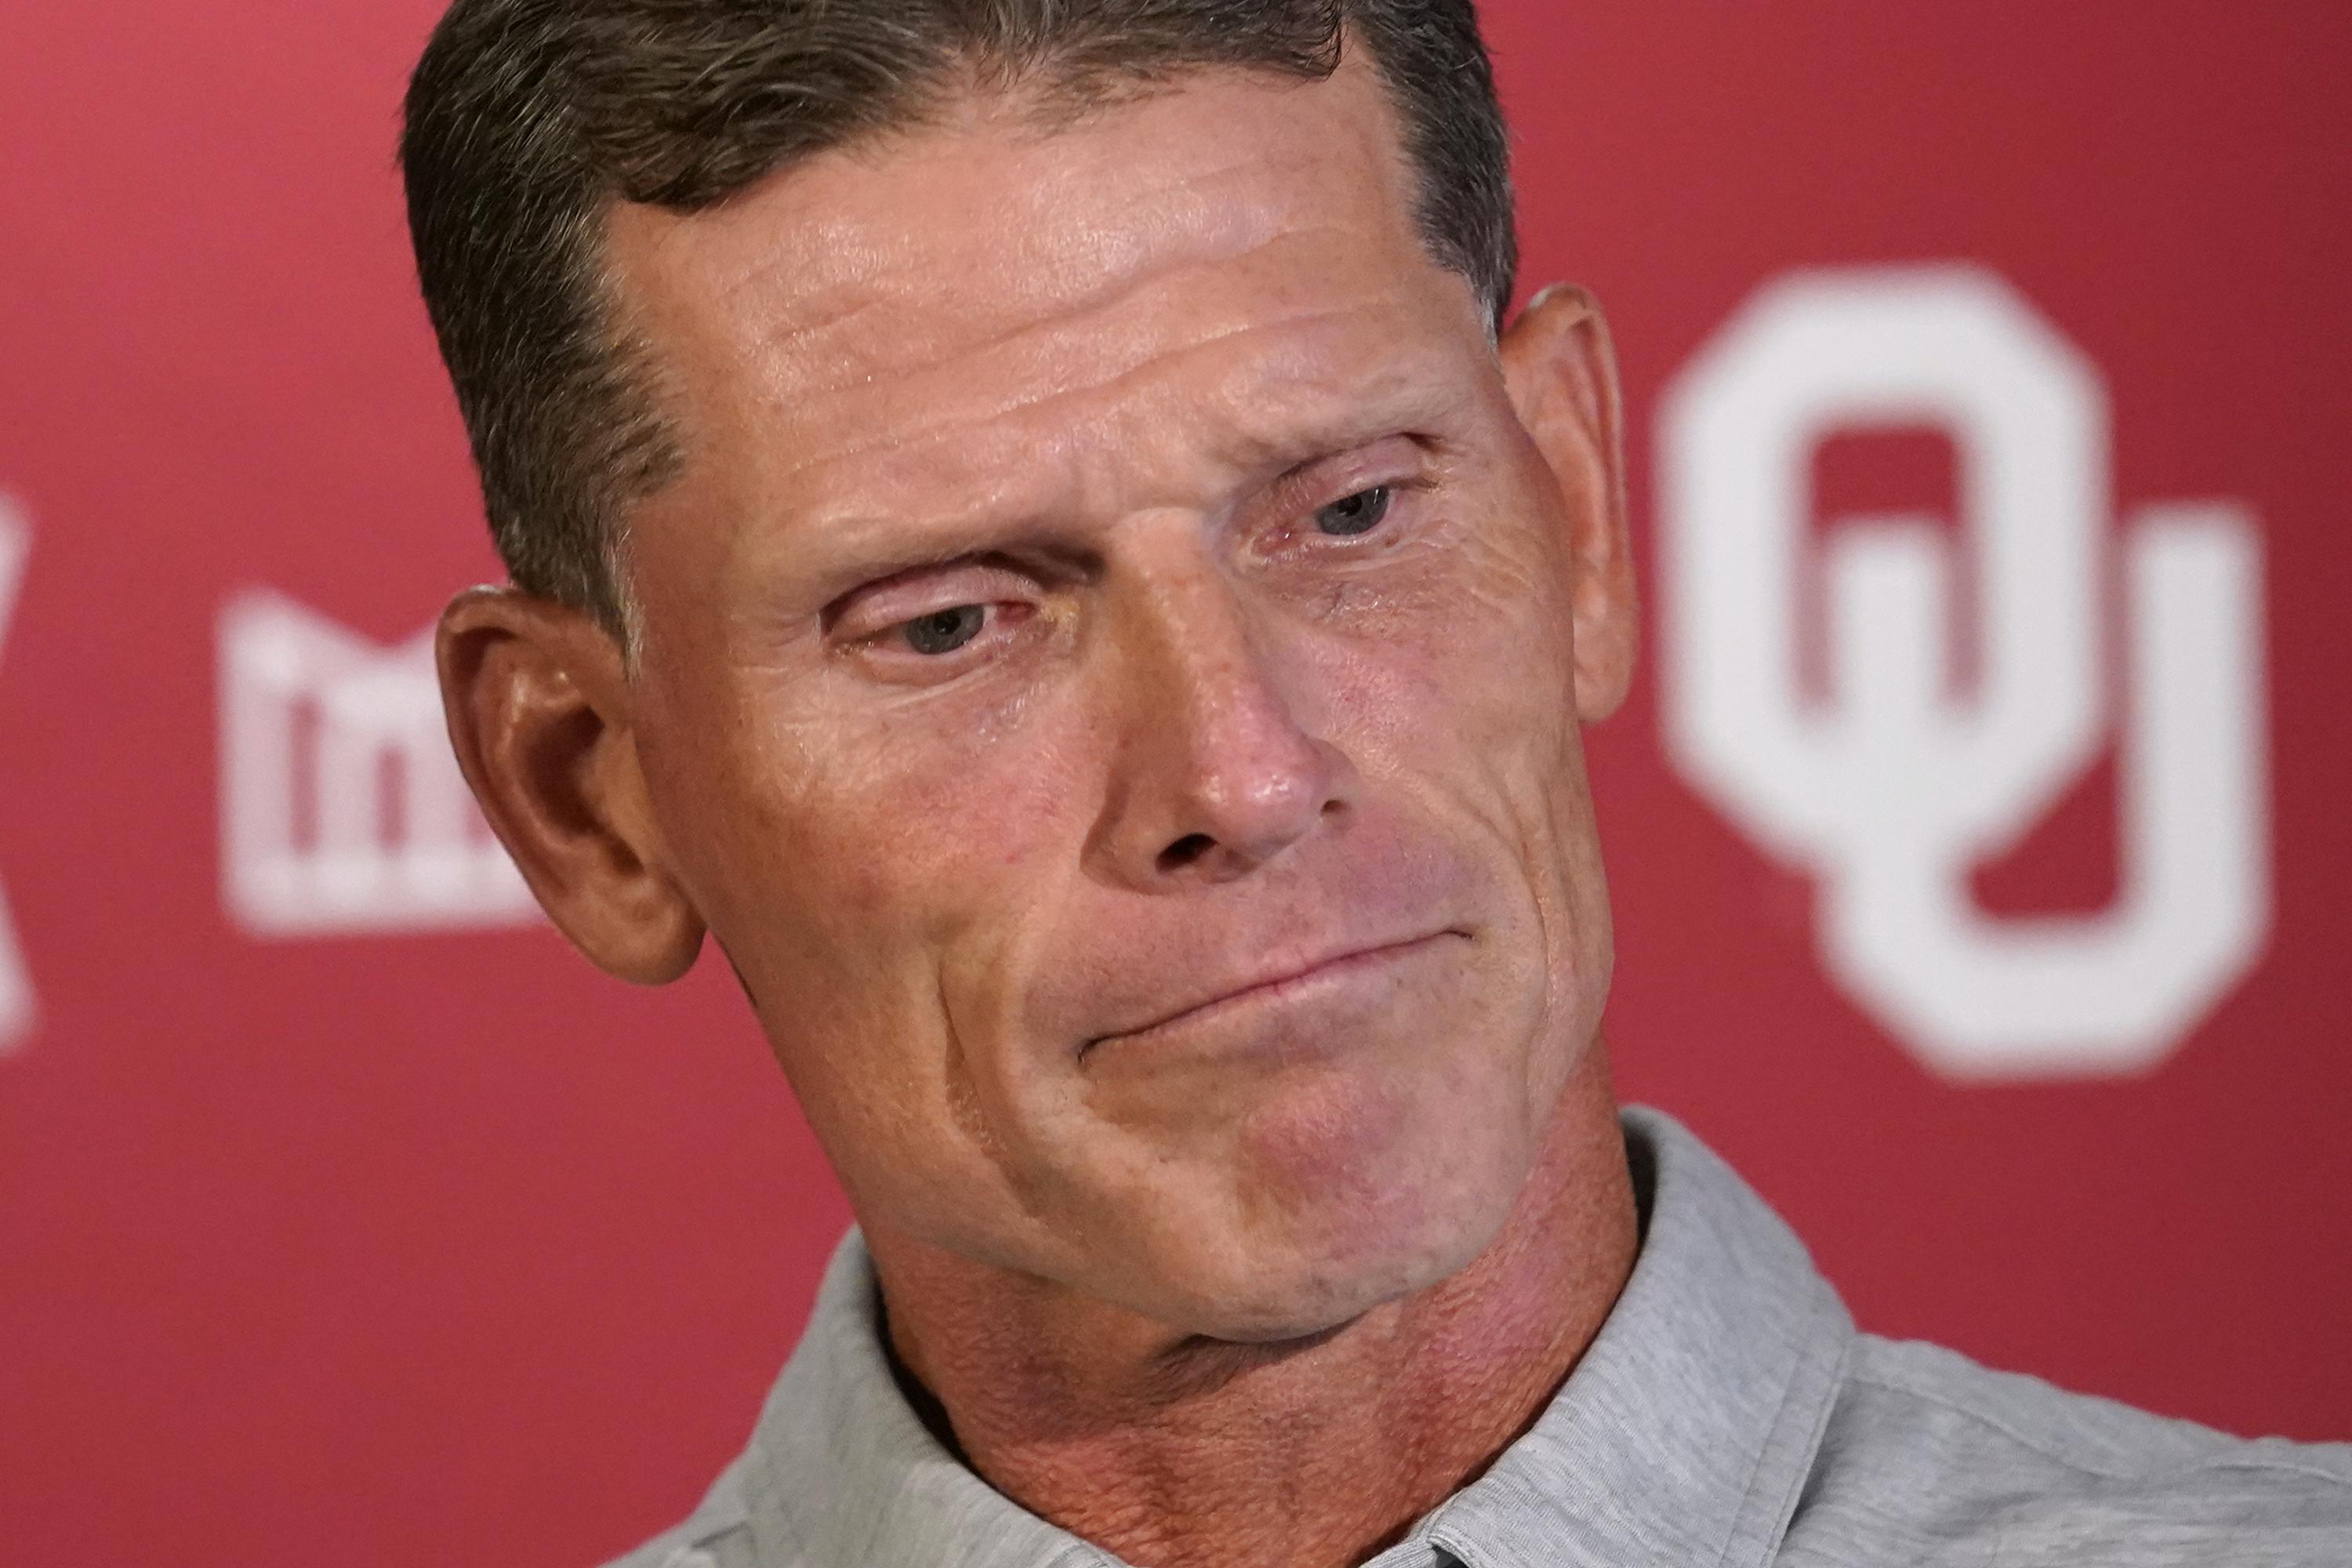 Oklahoma coach Brent Venables hits rough patch in 1st year | AP News